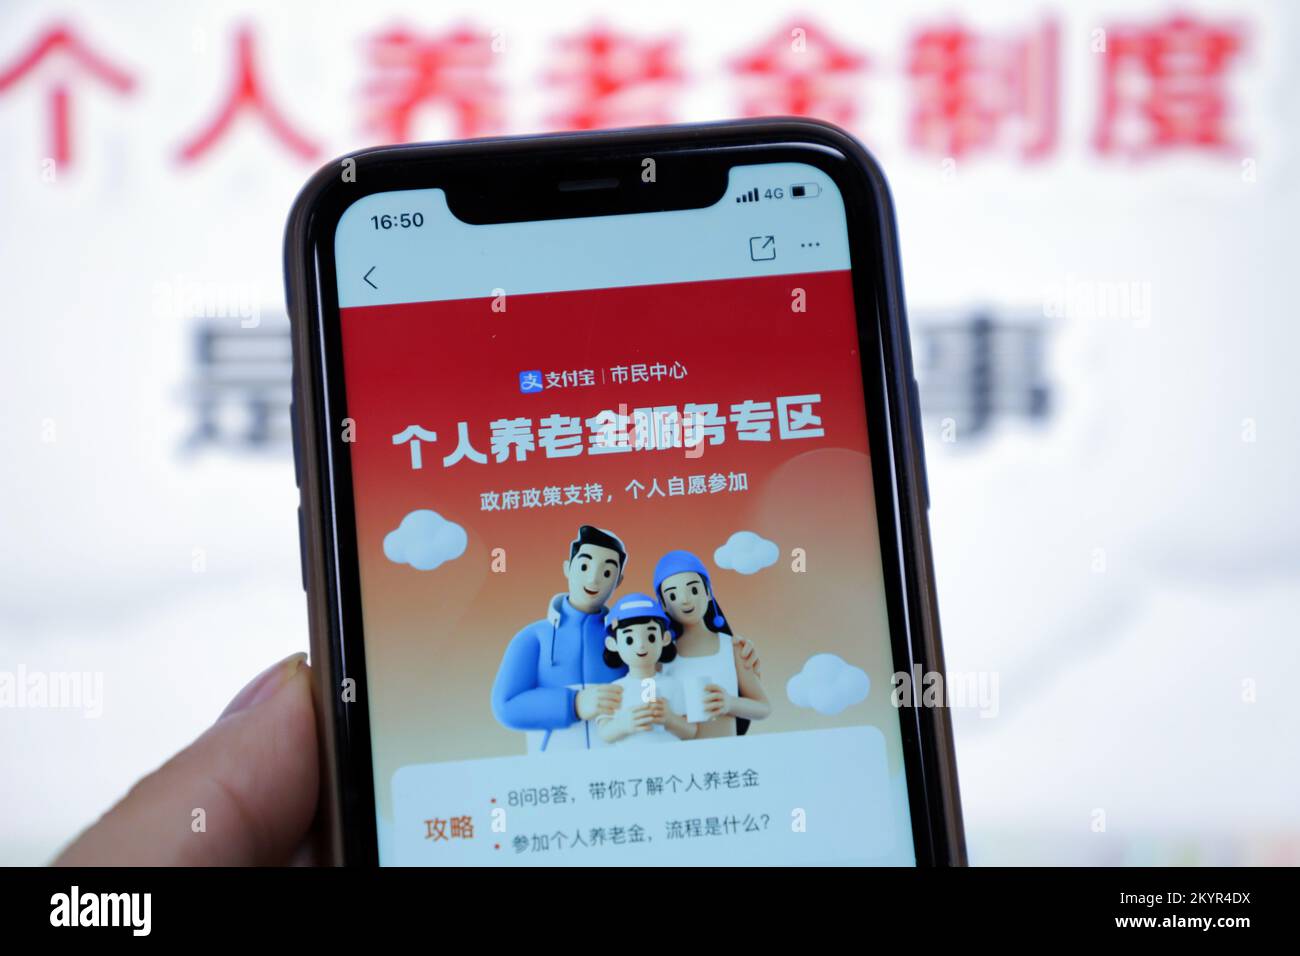 SHENZHEN, CHINA - DECEMBER 2, 2022 - A mobile phone displays the private pension scheme interface in Shenzhen, Guangdong province, China, Dec 2, 2022. Stock Photo